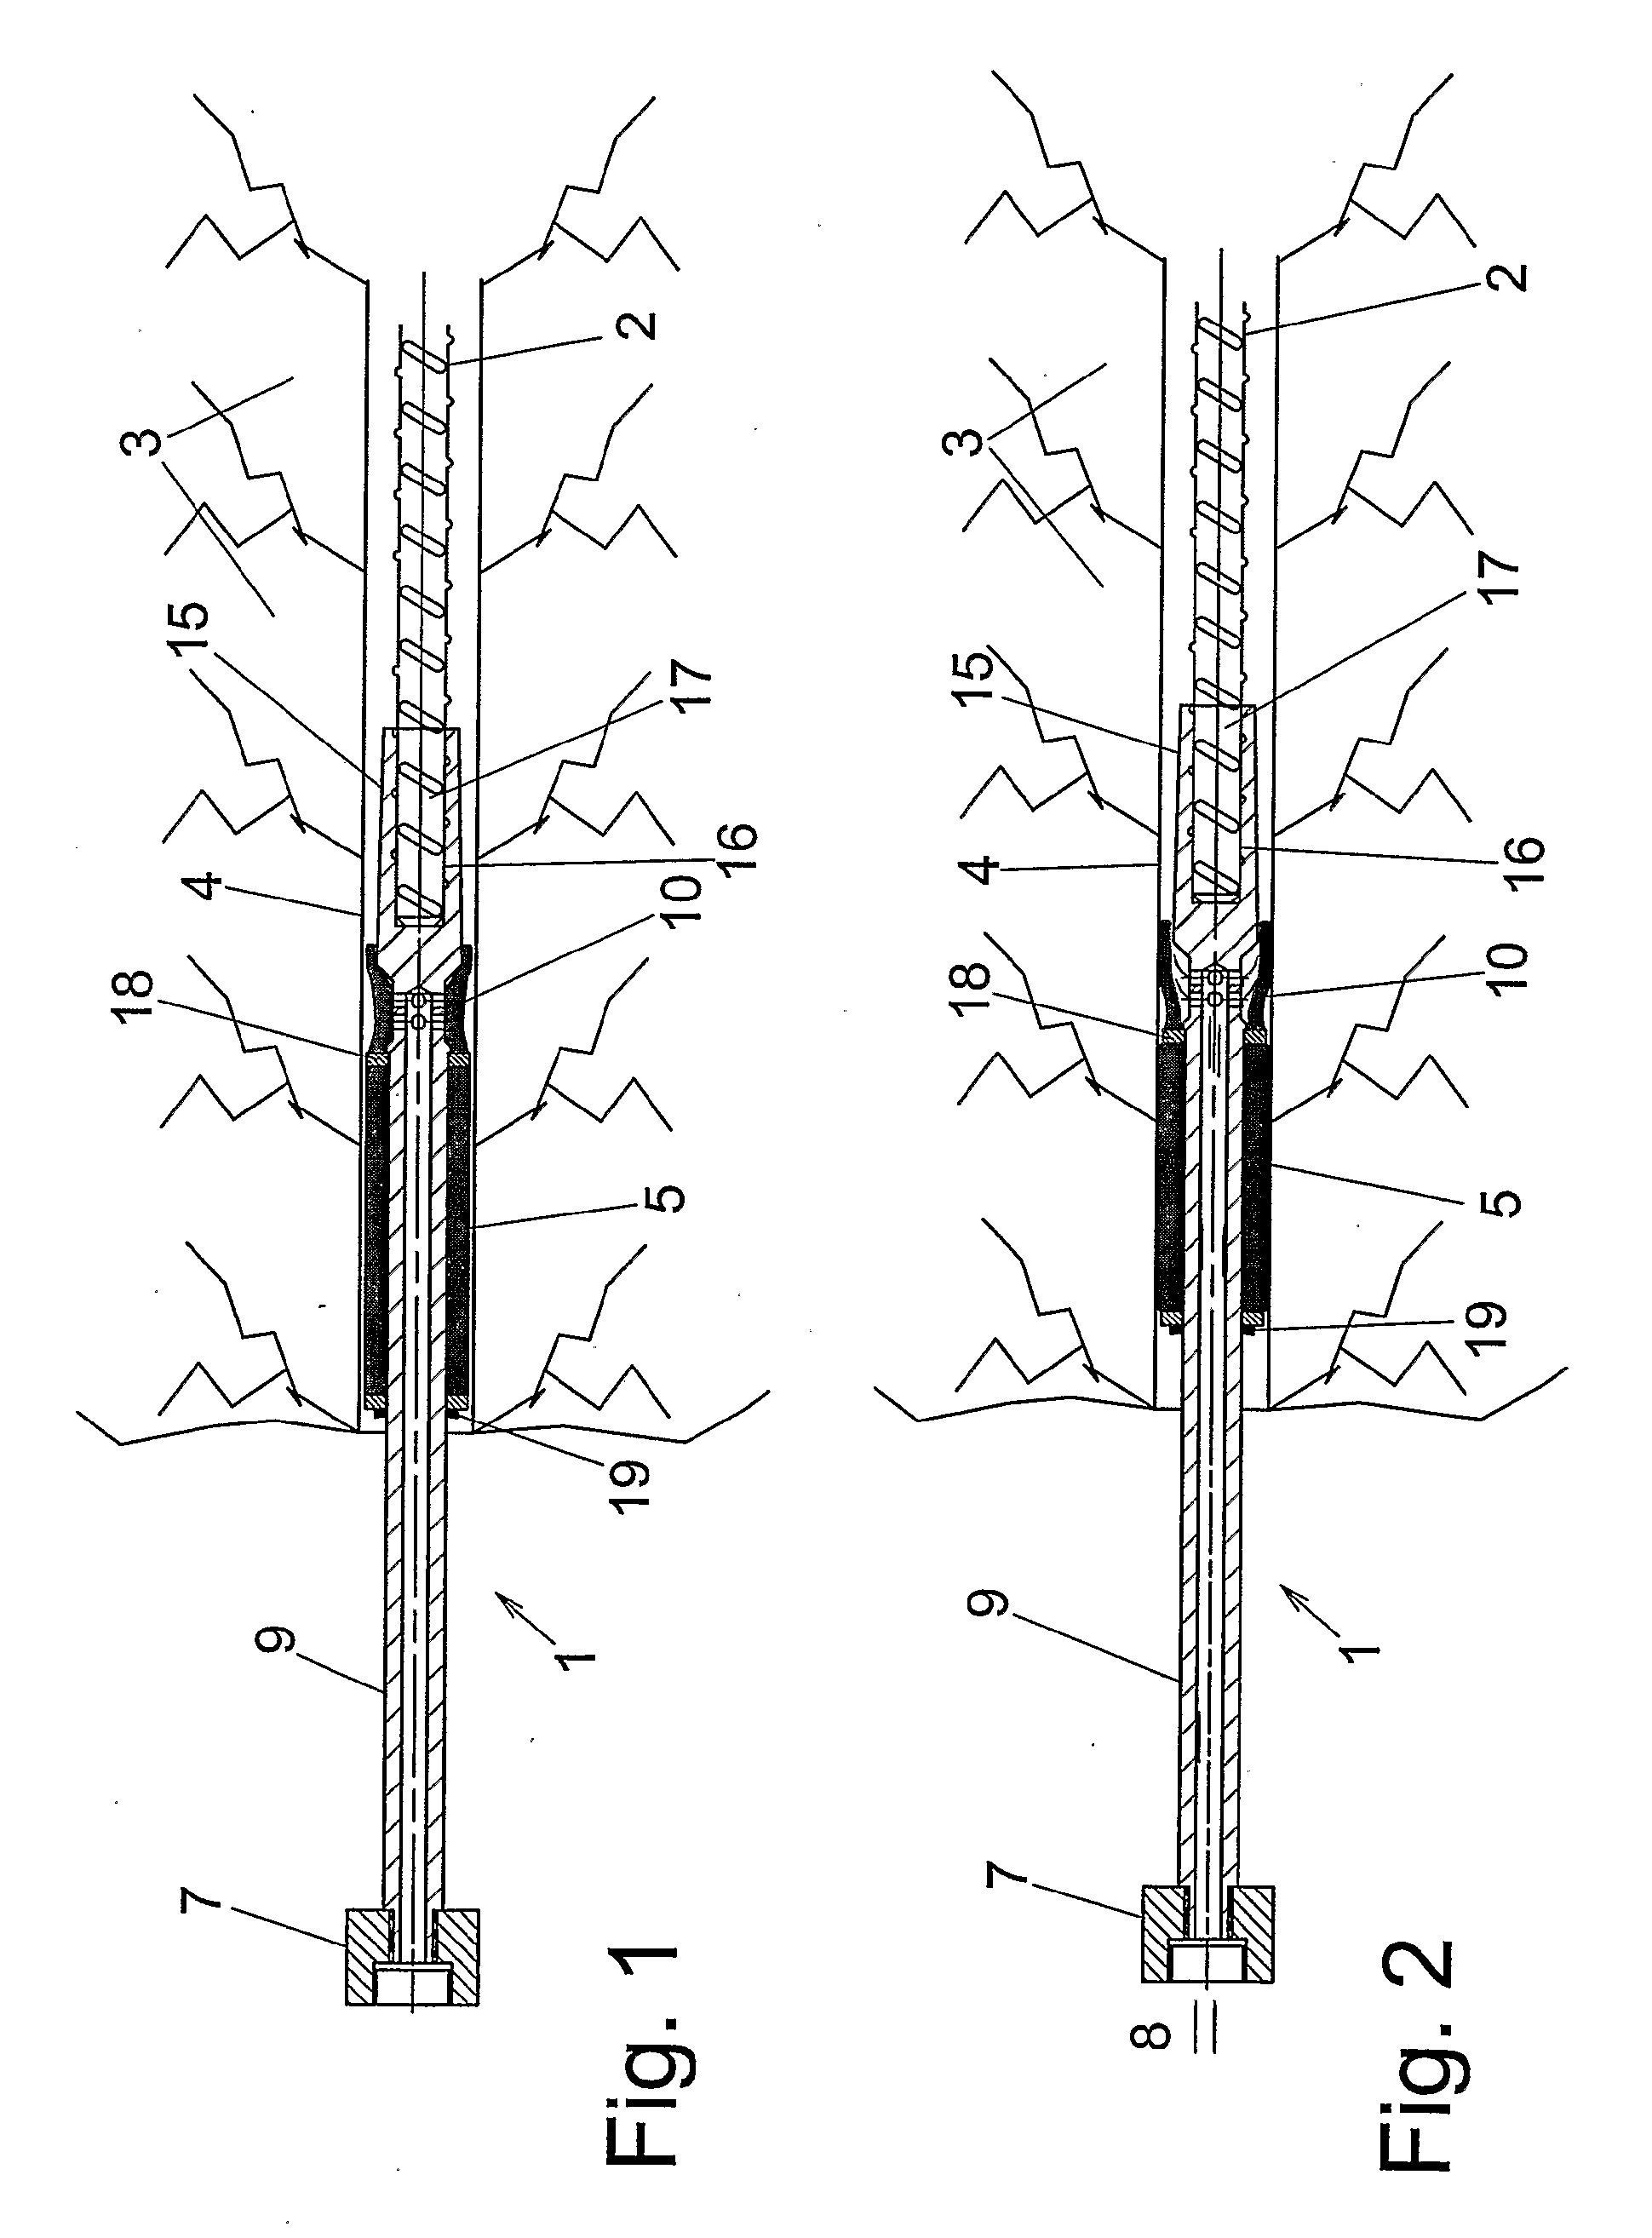 Arrangement for injecting and affixing a reinforcing or anchoring element in a rock wall